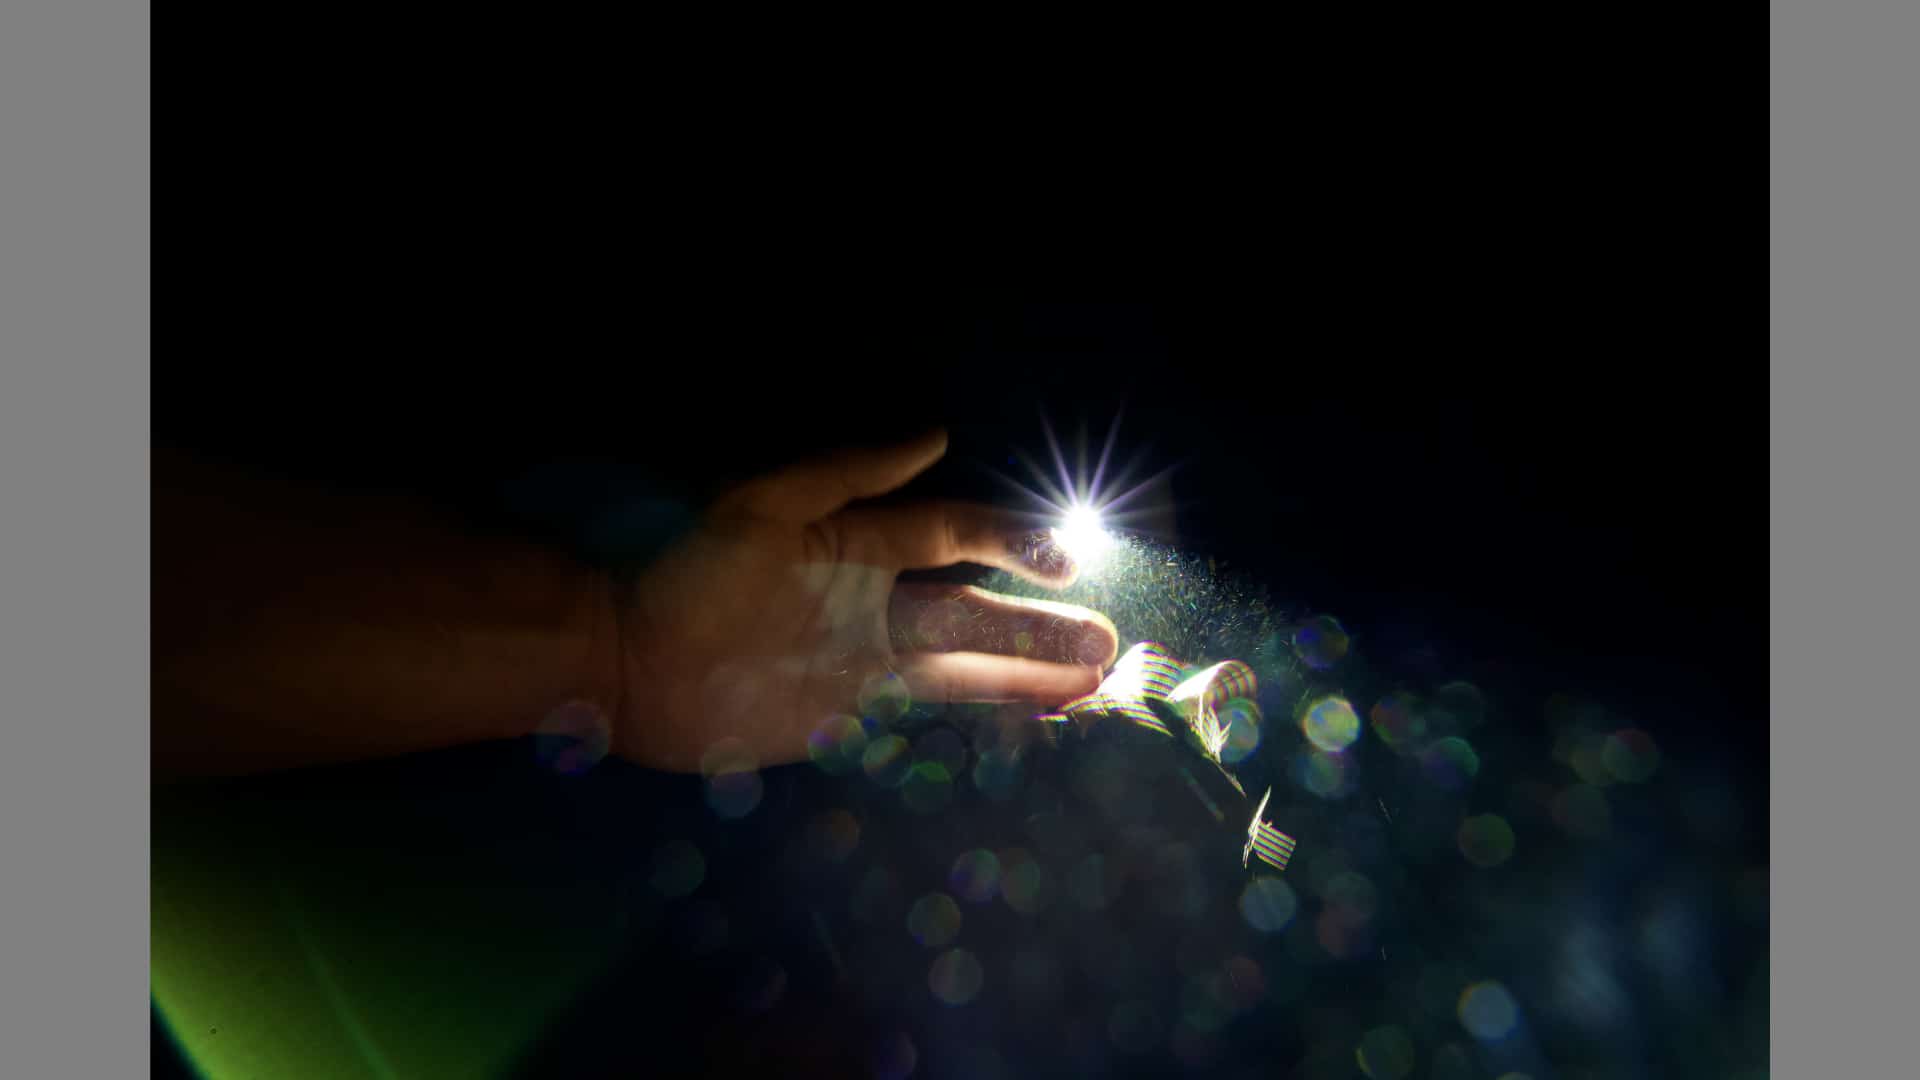 A hand reaches through the darkness to touch a spark of light